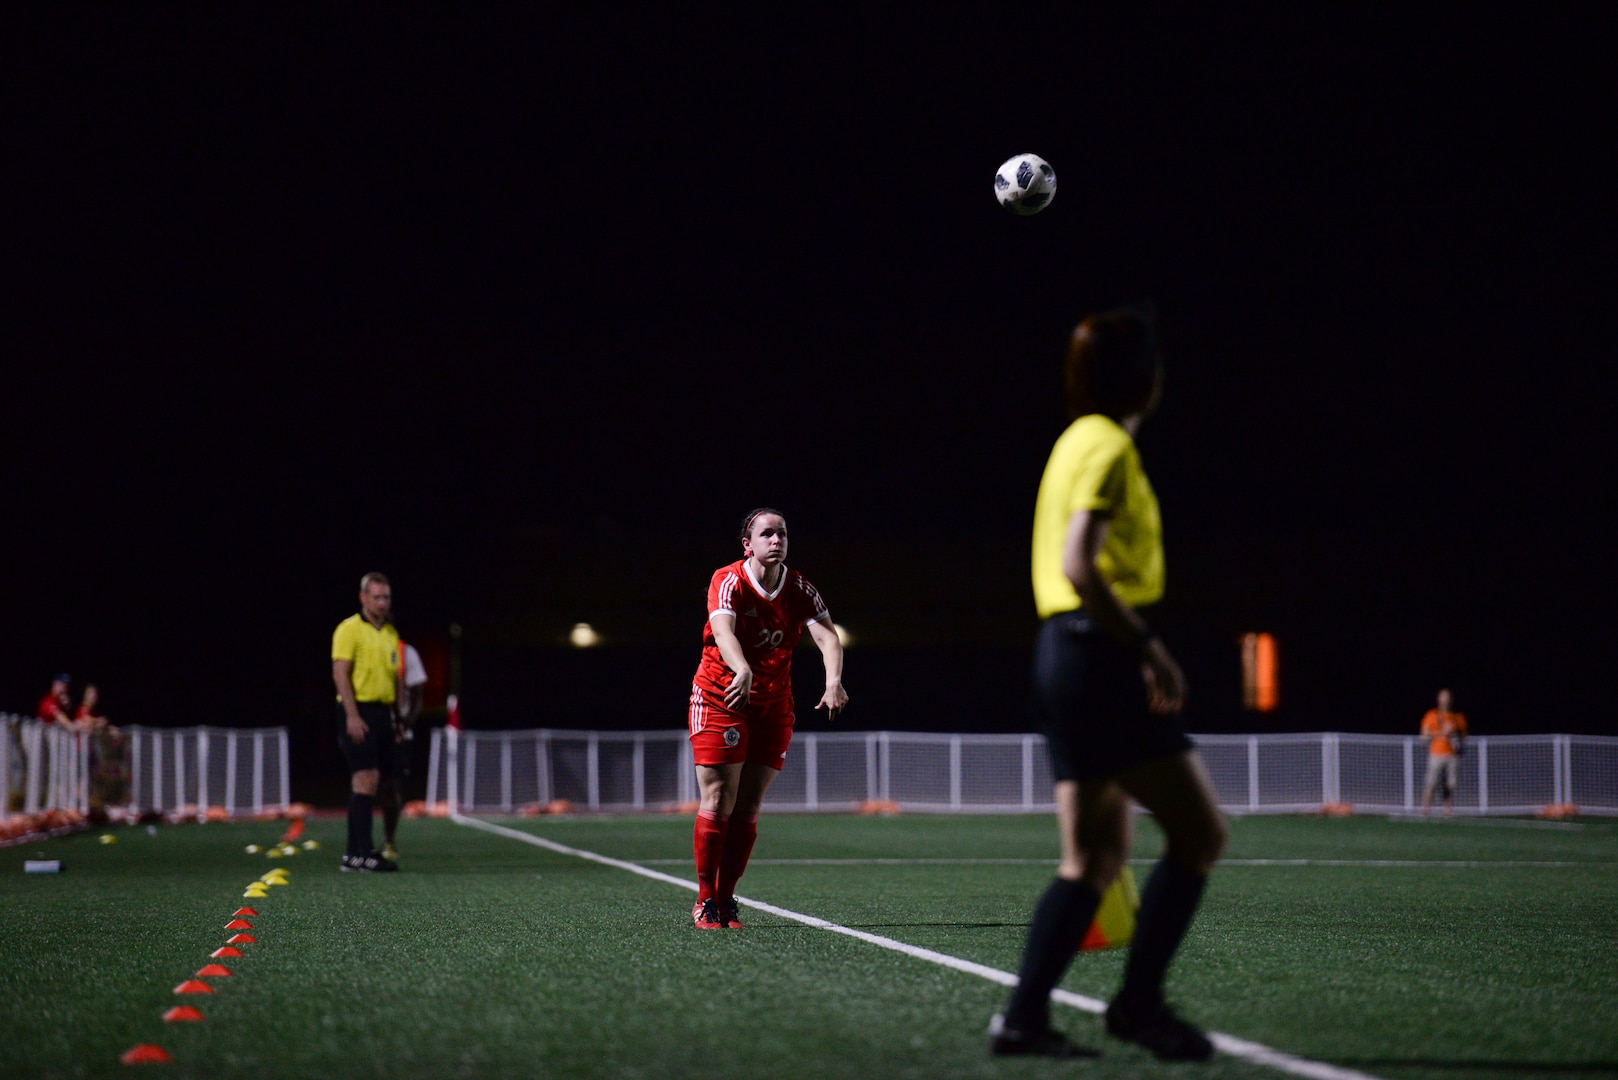 2018 Conseil International du Sport Militaire (CISM) World Military Women’s Football Championship. International military teams squared off at Fort Bliss’ Stout Field June 22 - July 3, 2018